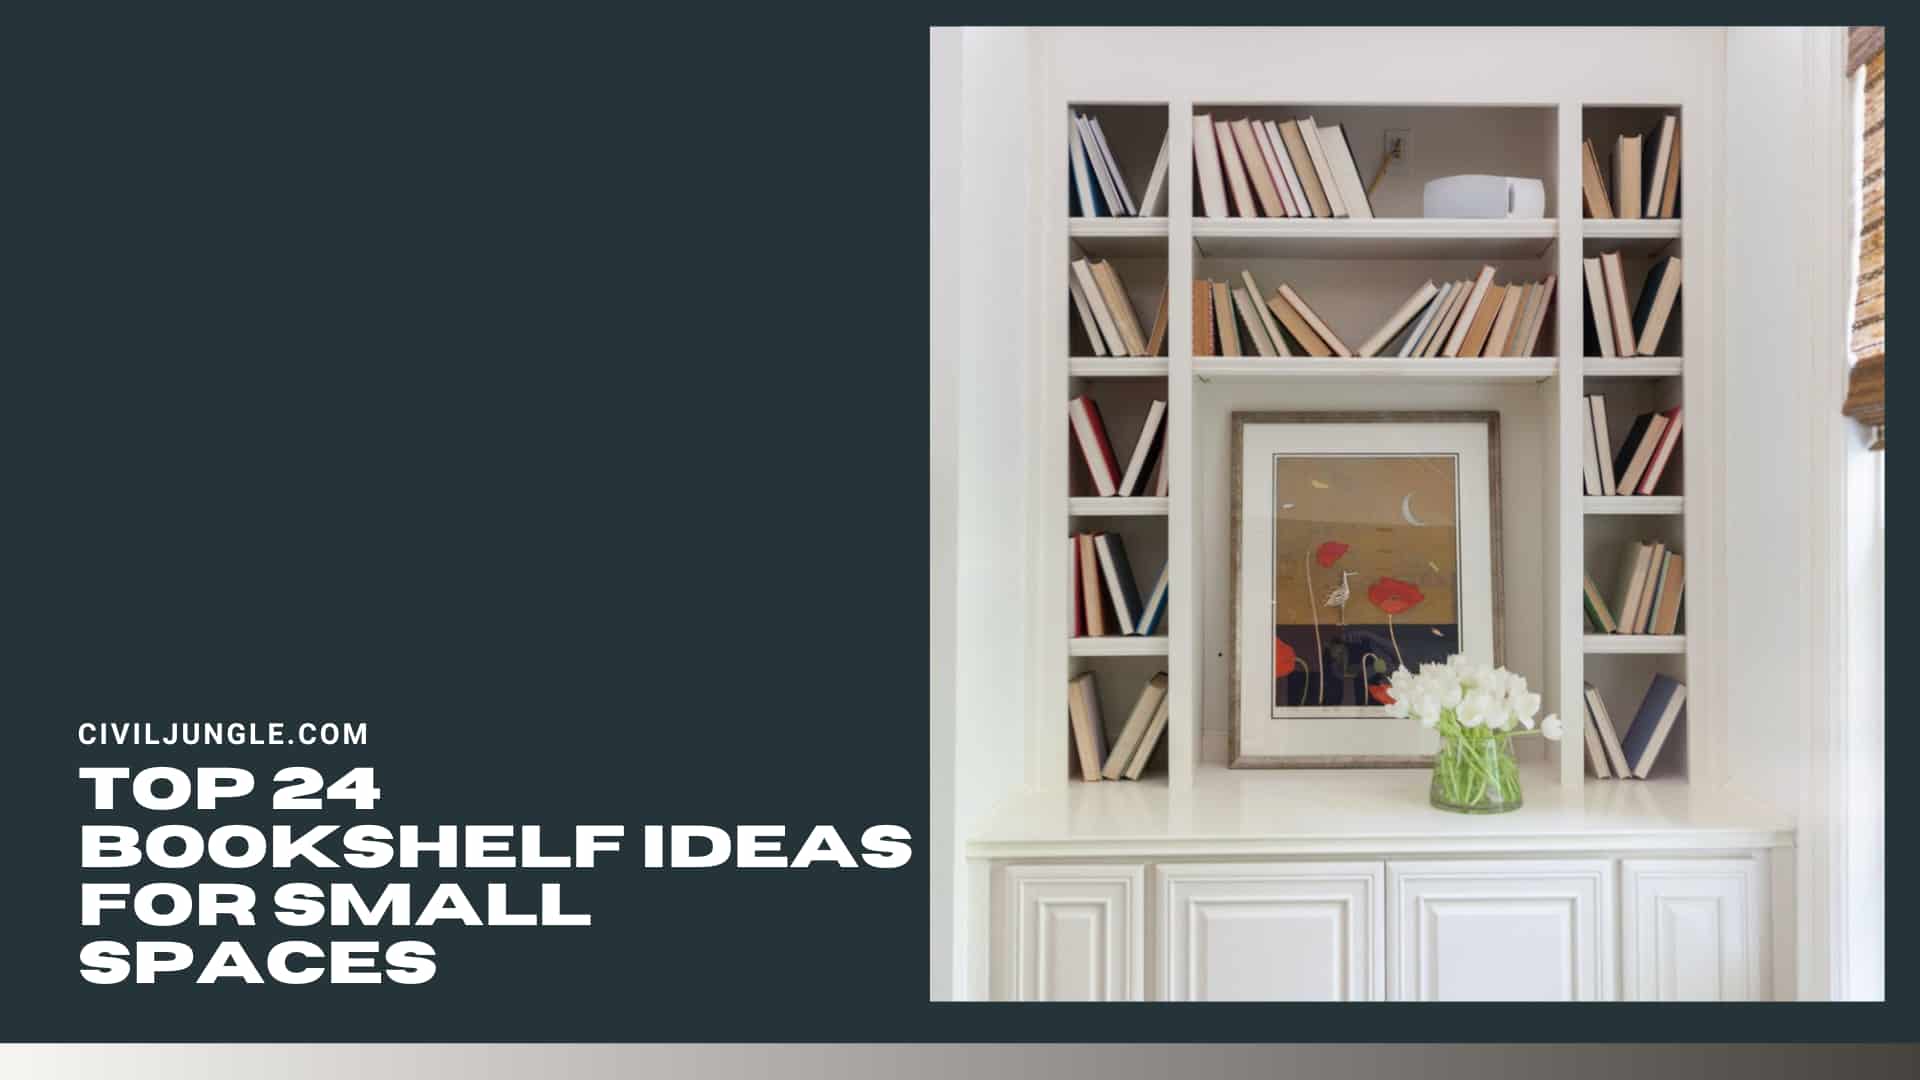 Top 24 Bookshelf Ideas for Small Spaces